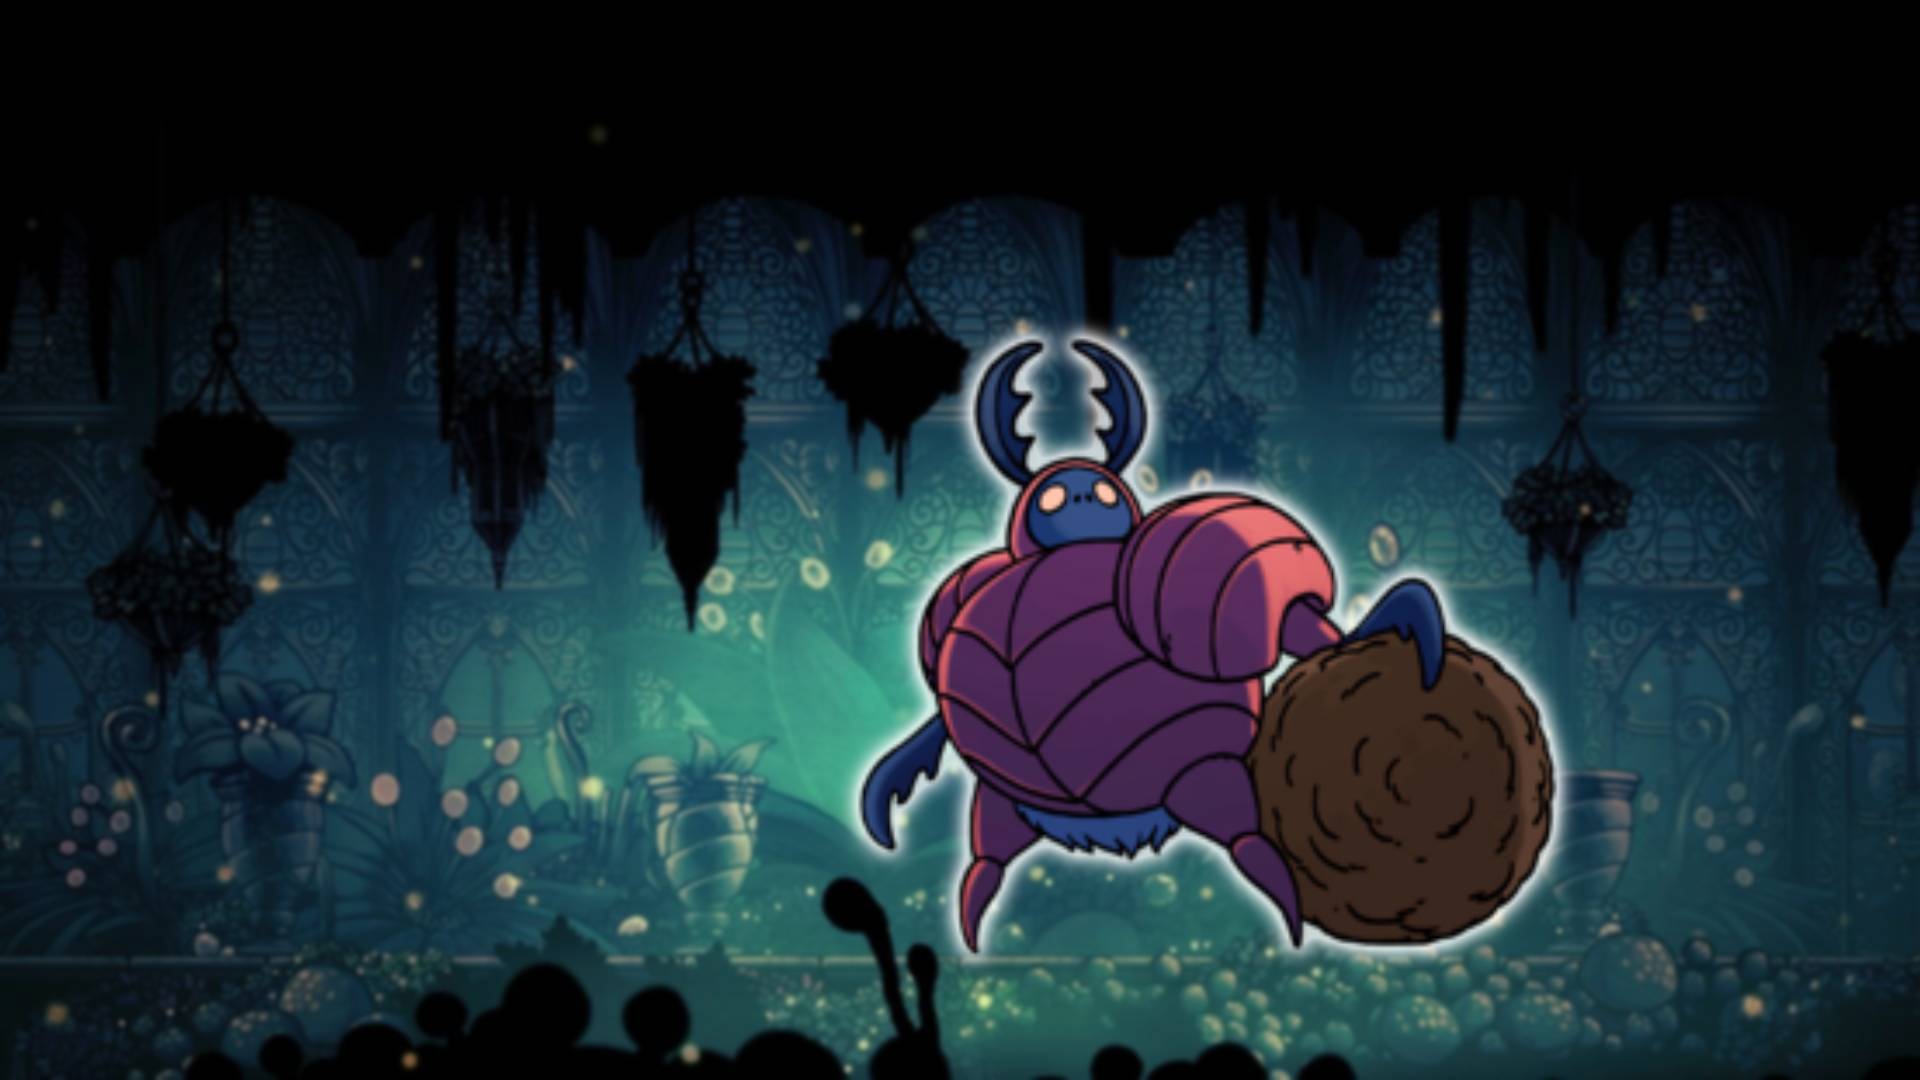 Dung Defender - the Hollow Knight boss, is visible against a mossy green background area from Hollow Knight 